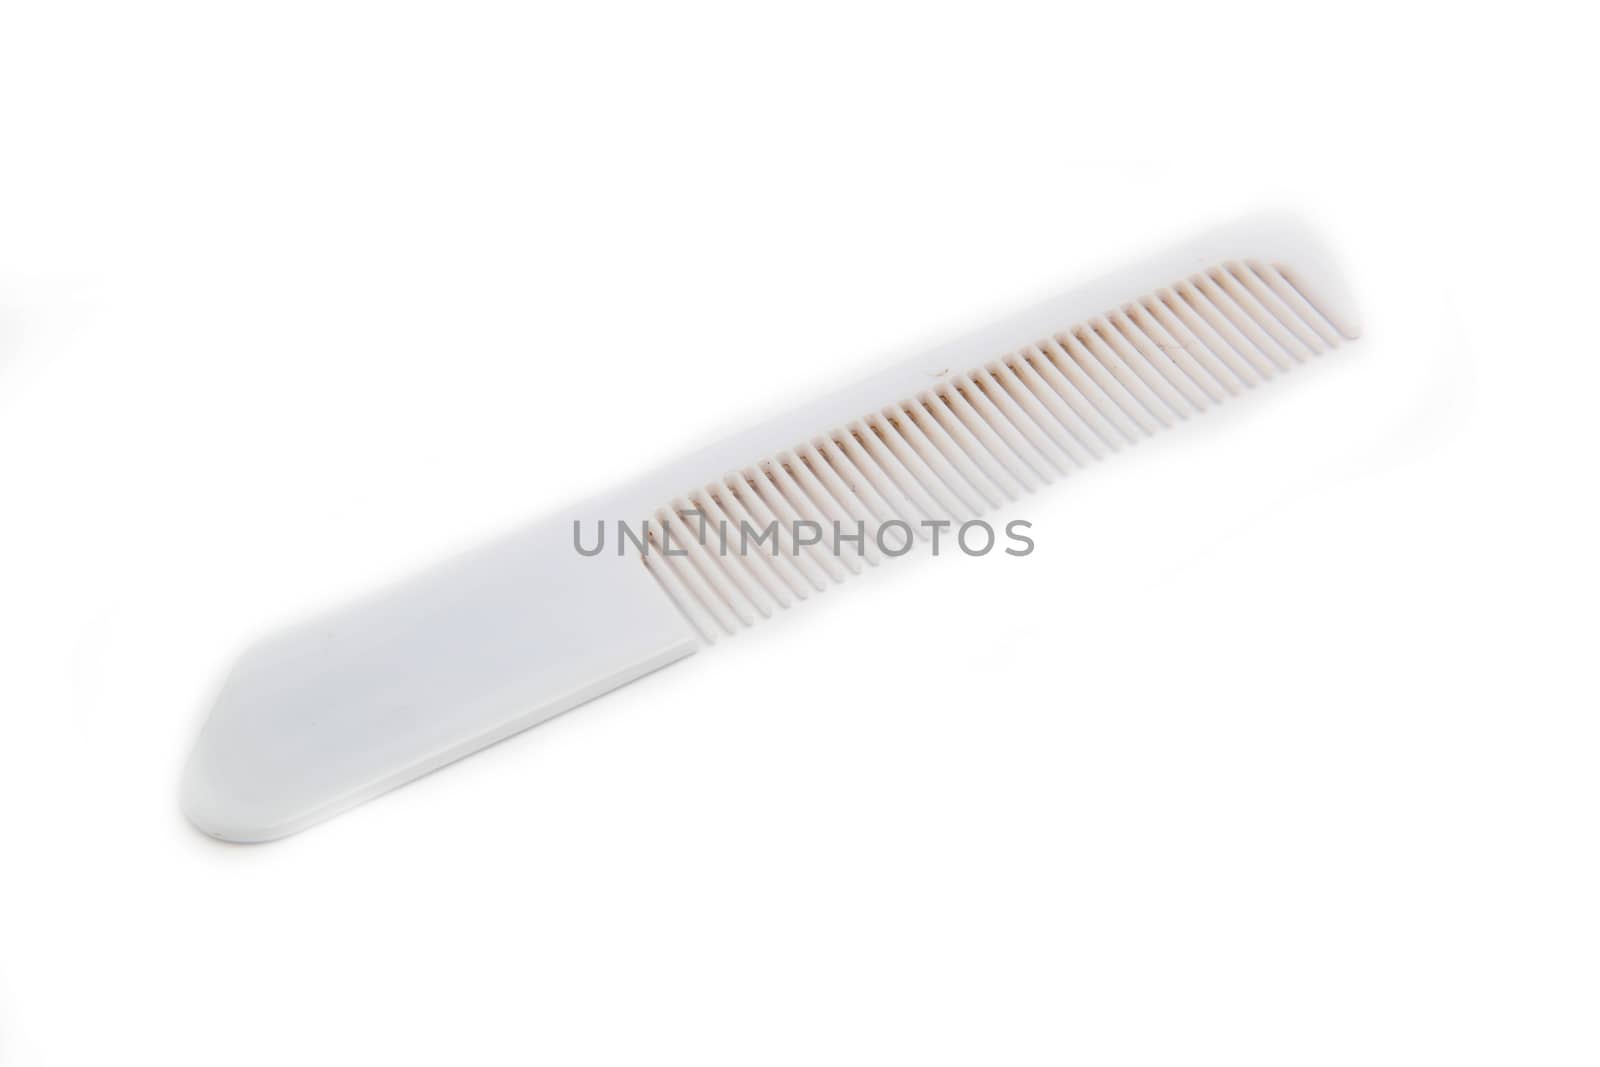 comb for hair; isolated, clipping path included